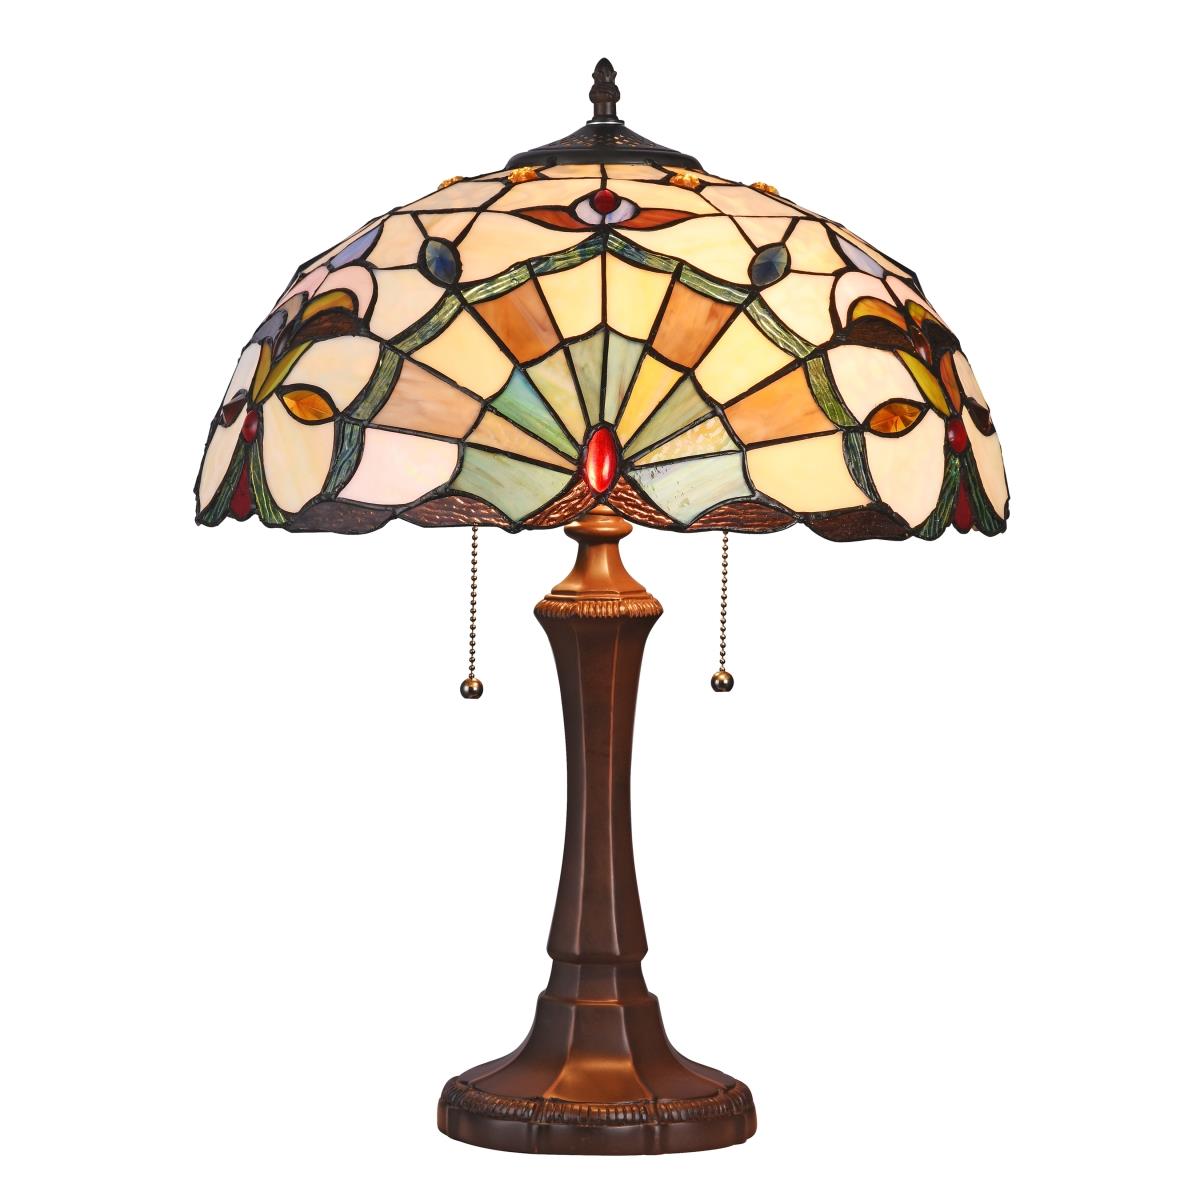 Ch3t986bv16-tl2 Addie Tiffany-style 2 Light Victoriantable Lamp - 16 In. Shade